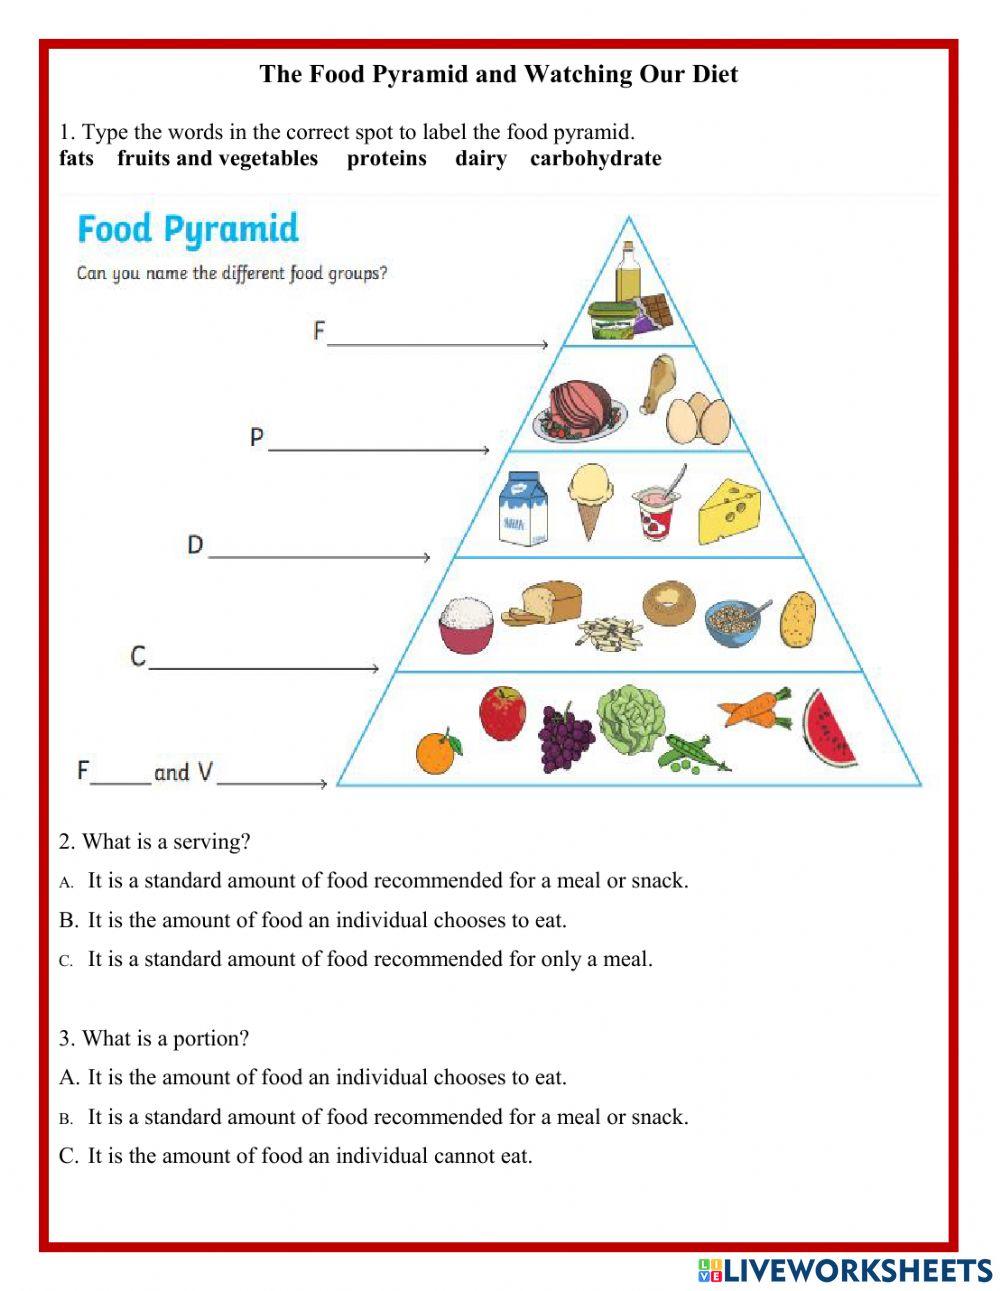 Food Pyramid and watching our diet